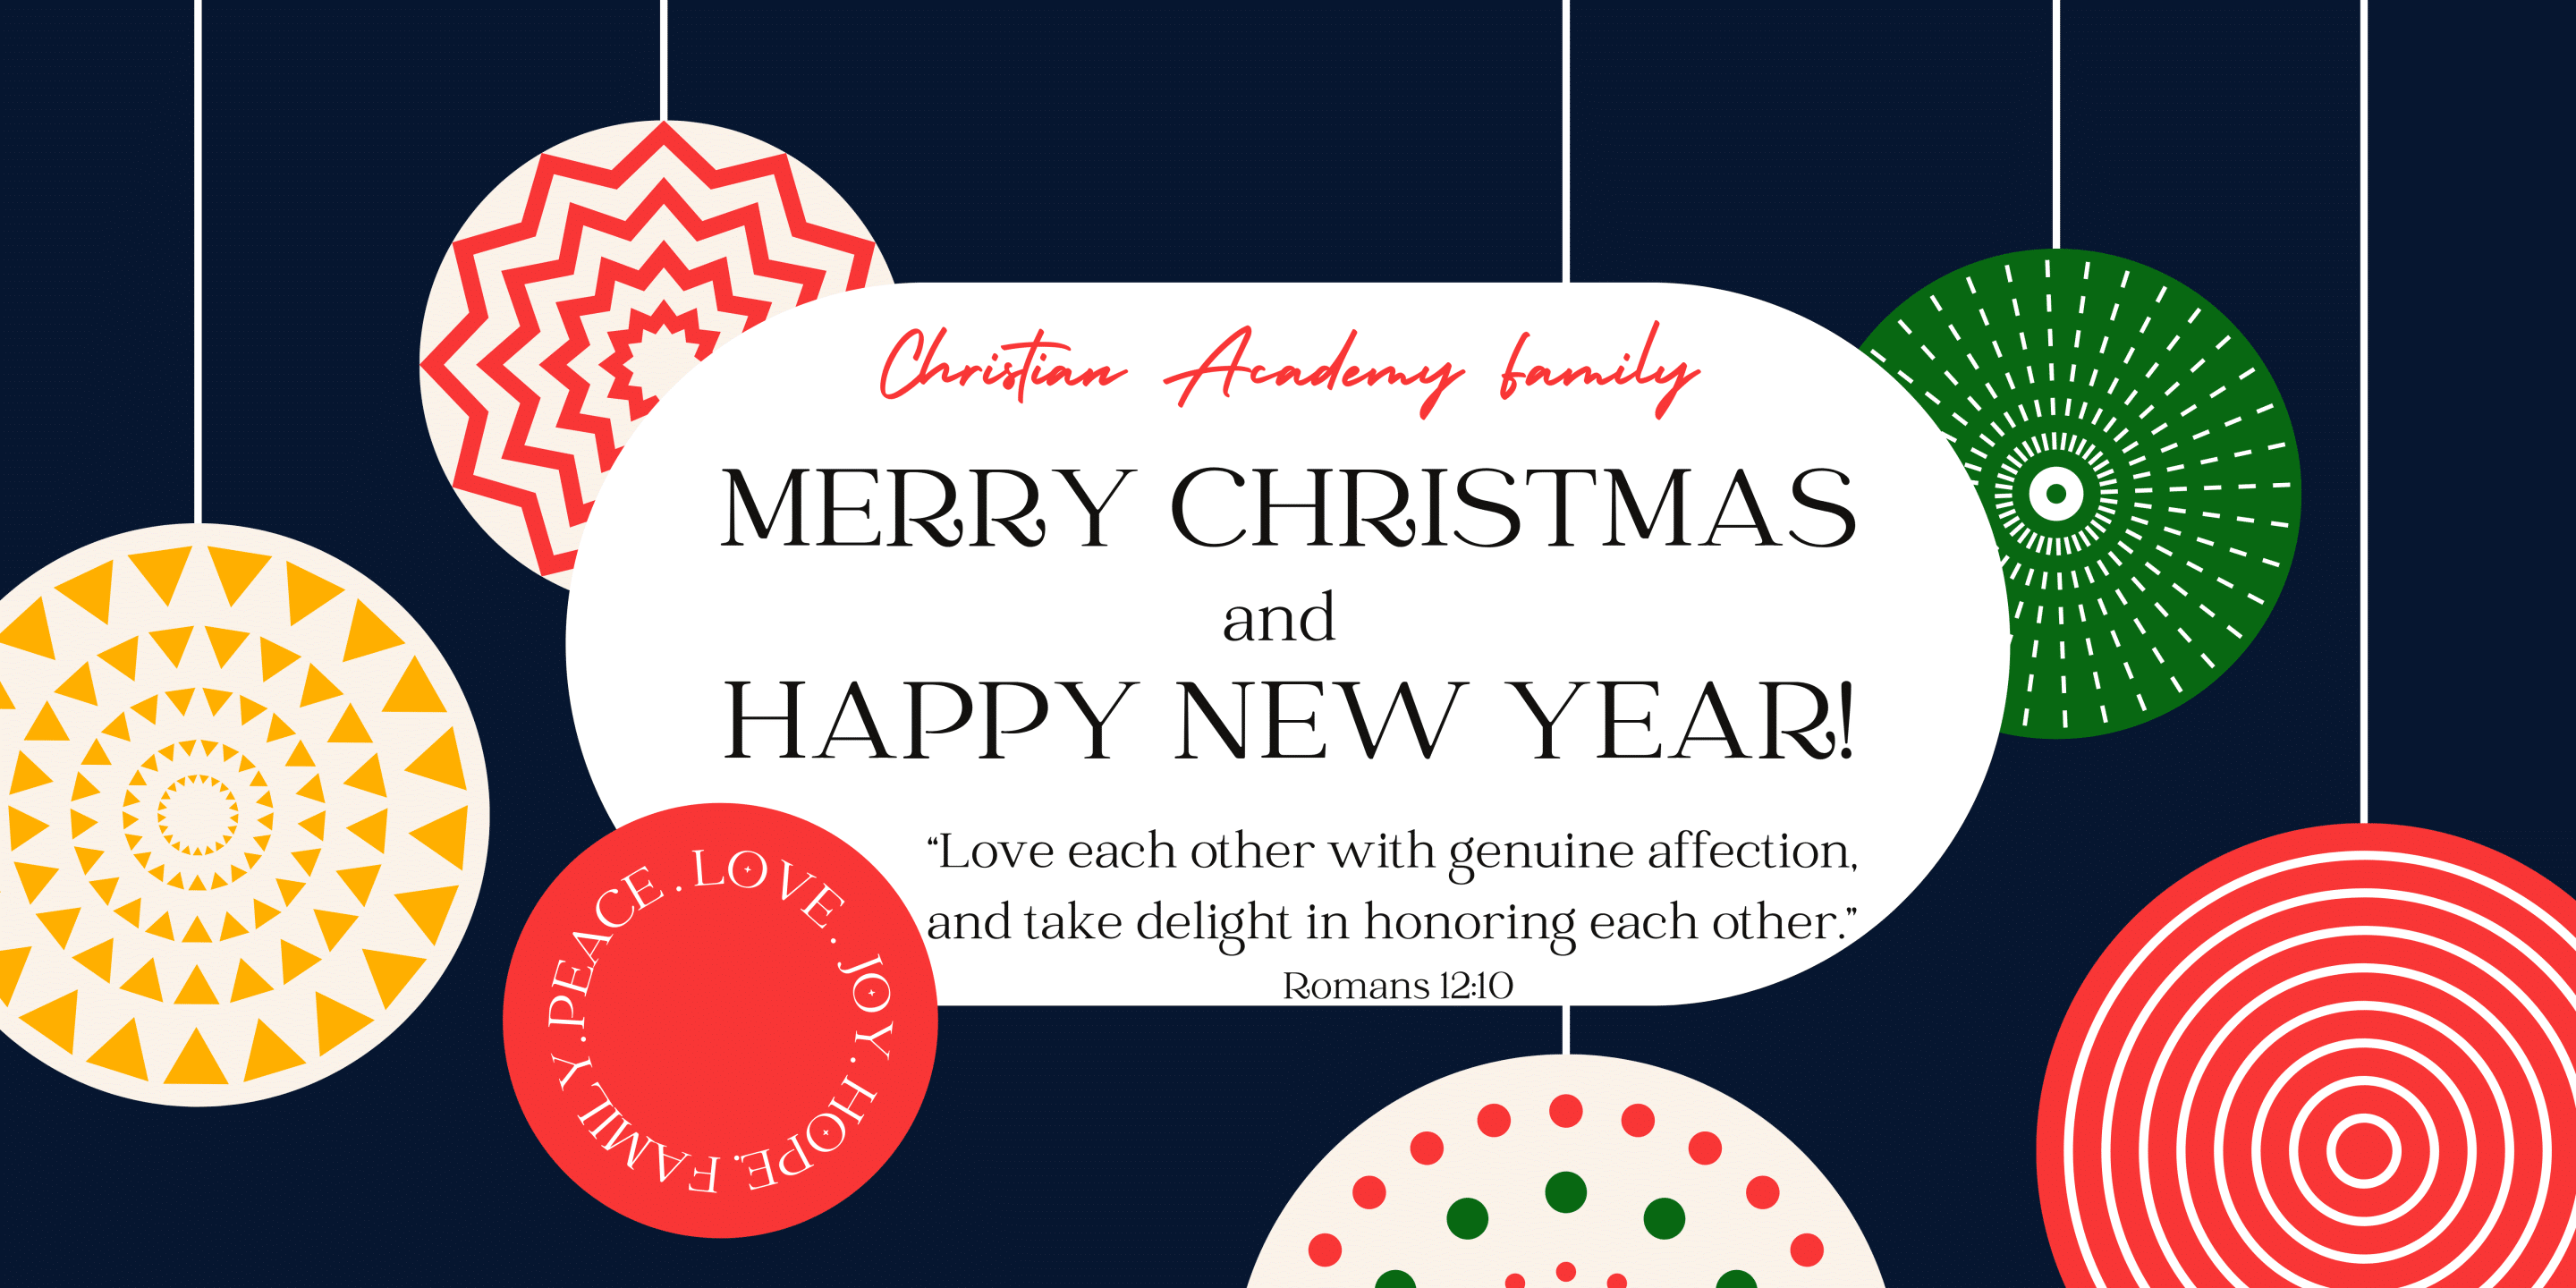 Christian Academy School System | Merry Christmas and Happy New Year!